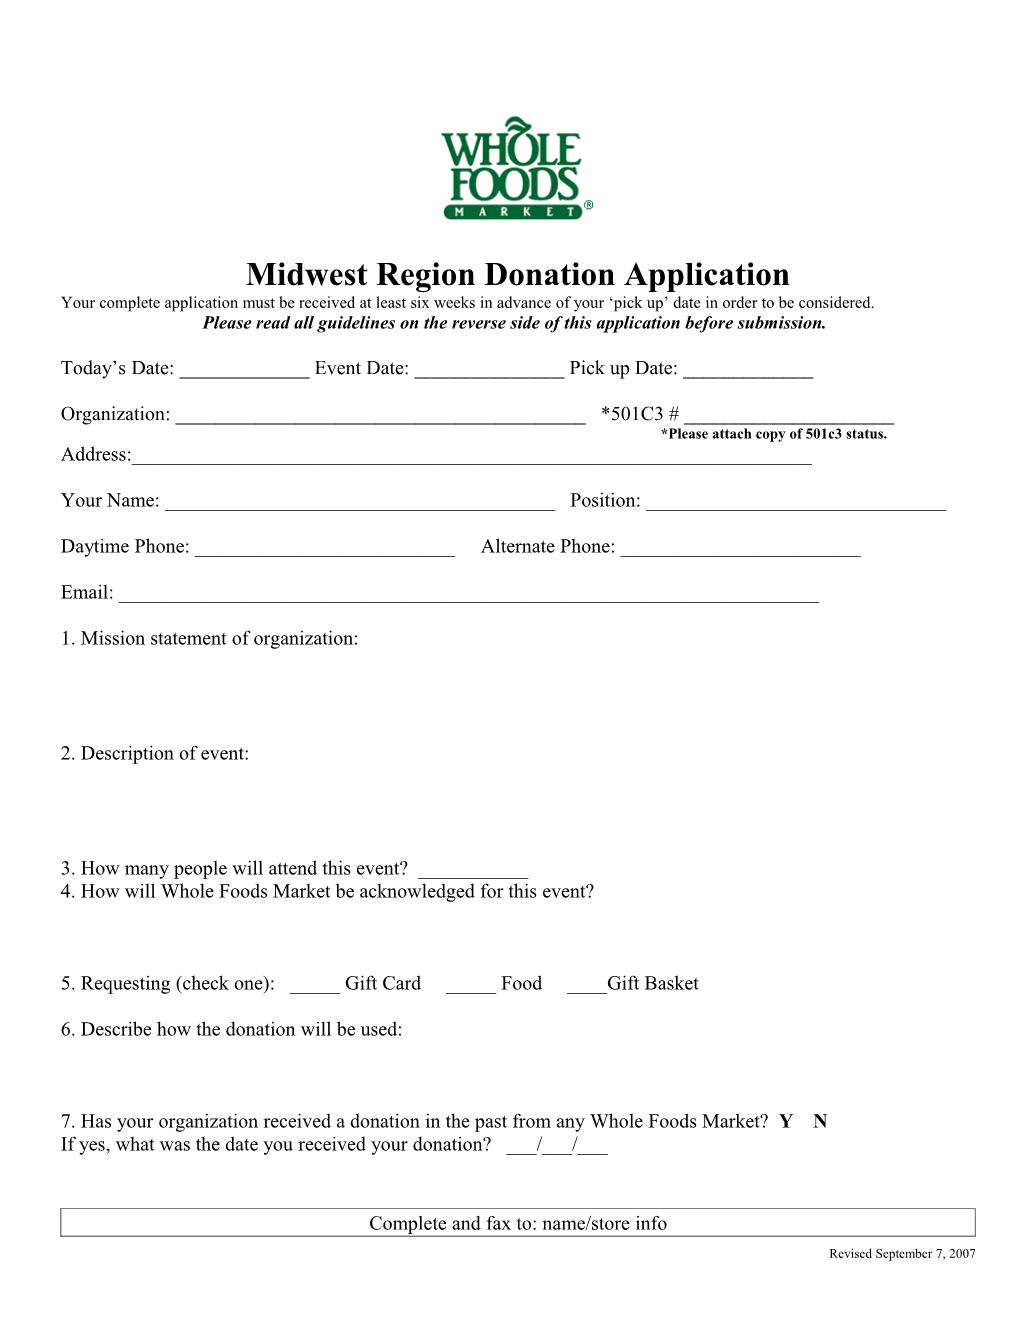 Midwest Region Donation Application